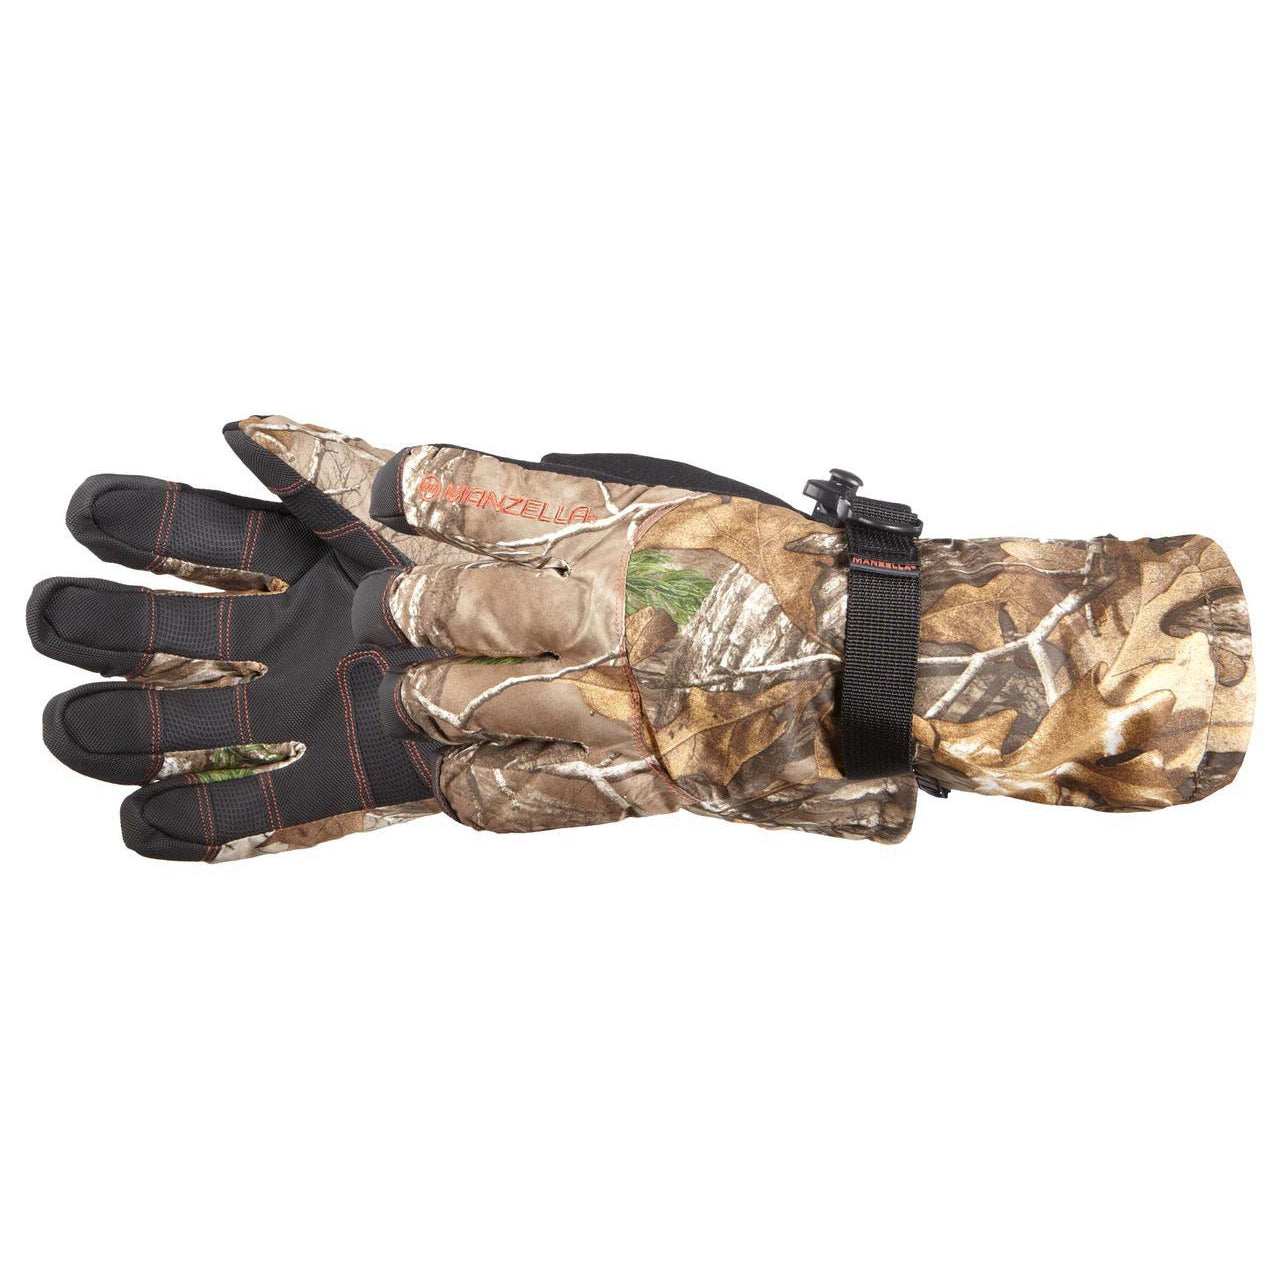 Manzella MH002M Grizzly Glove-MENS CLOTHING-Kevin's Fine Outdoor Gear & Apparel